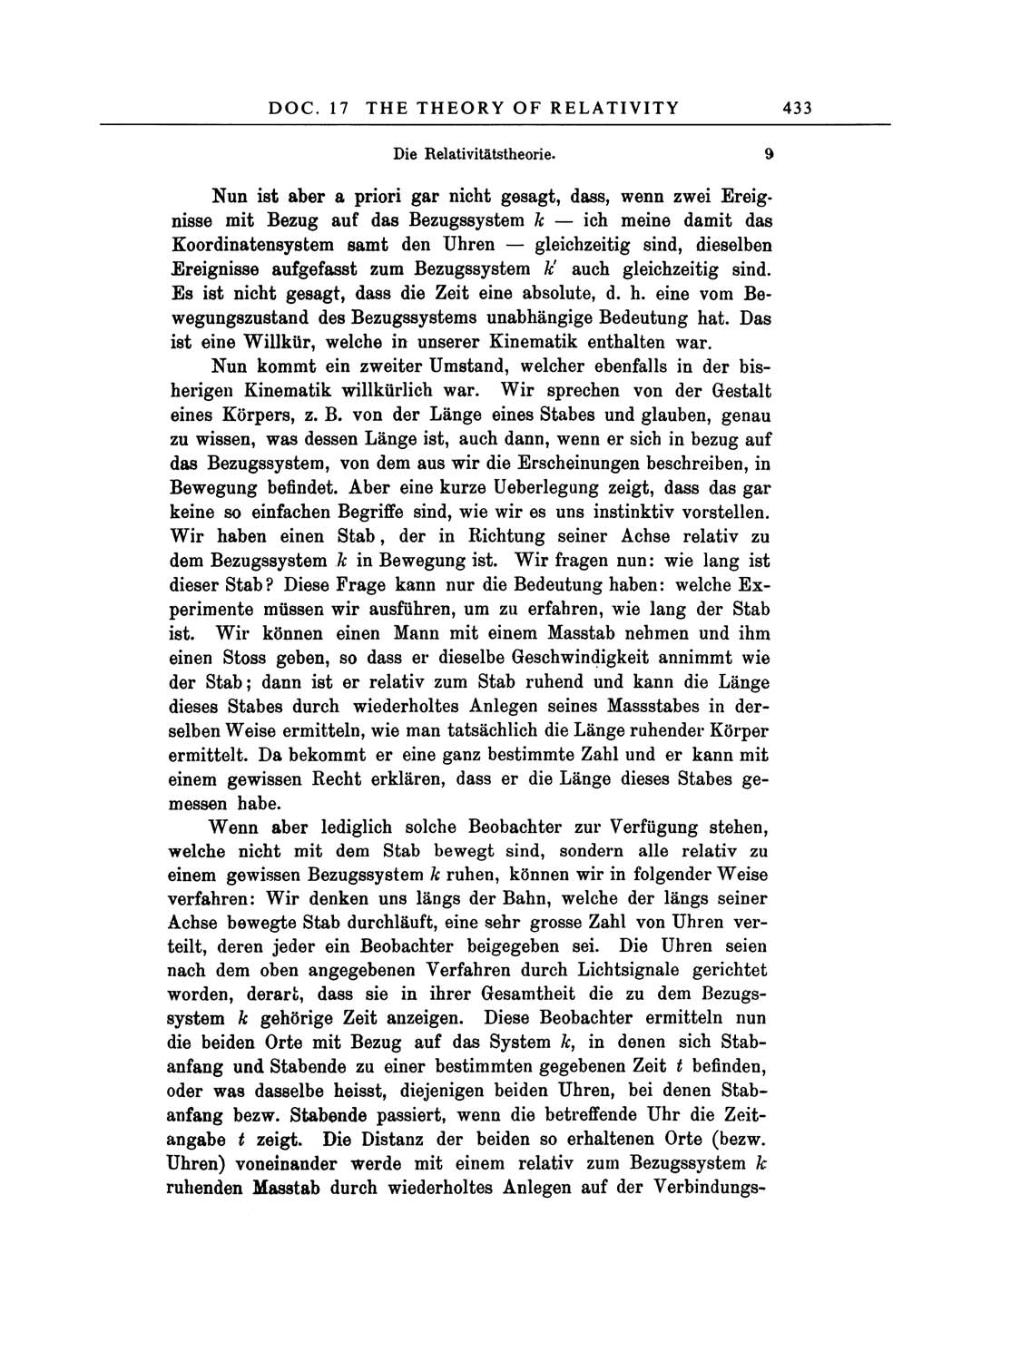 Volume 3: The Swiss Years: Writings 1909-1911 page 433